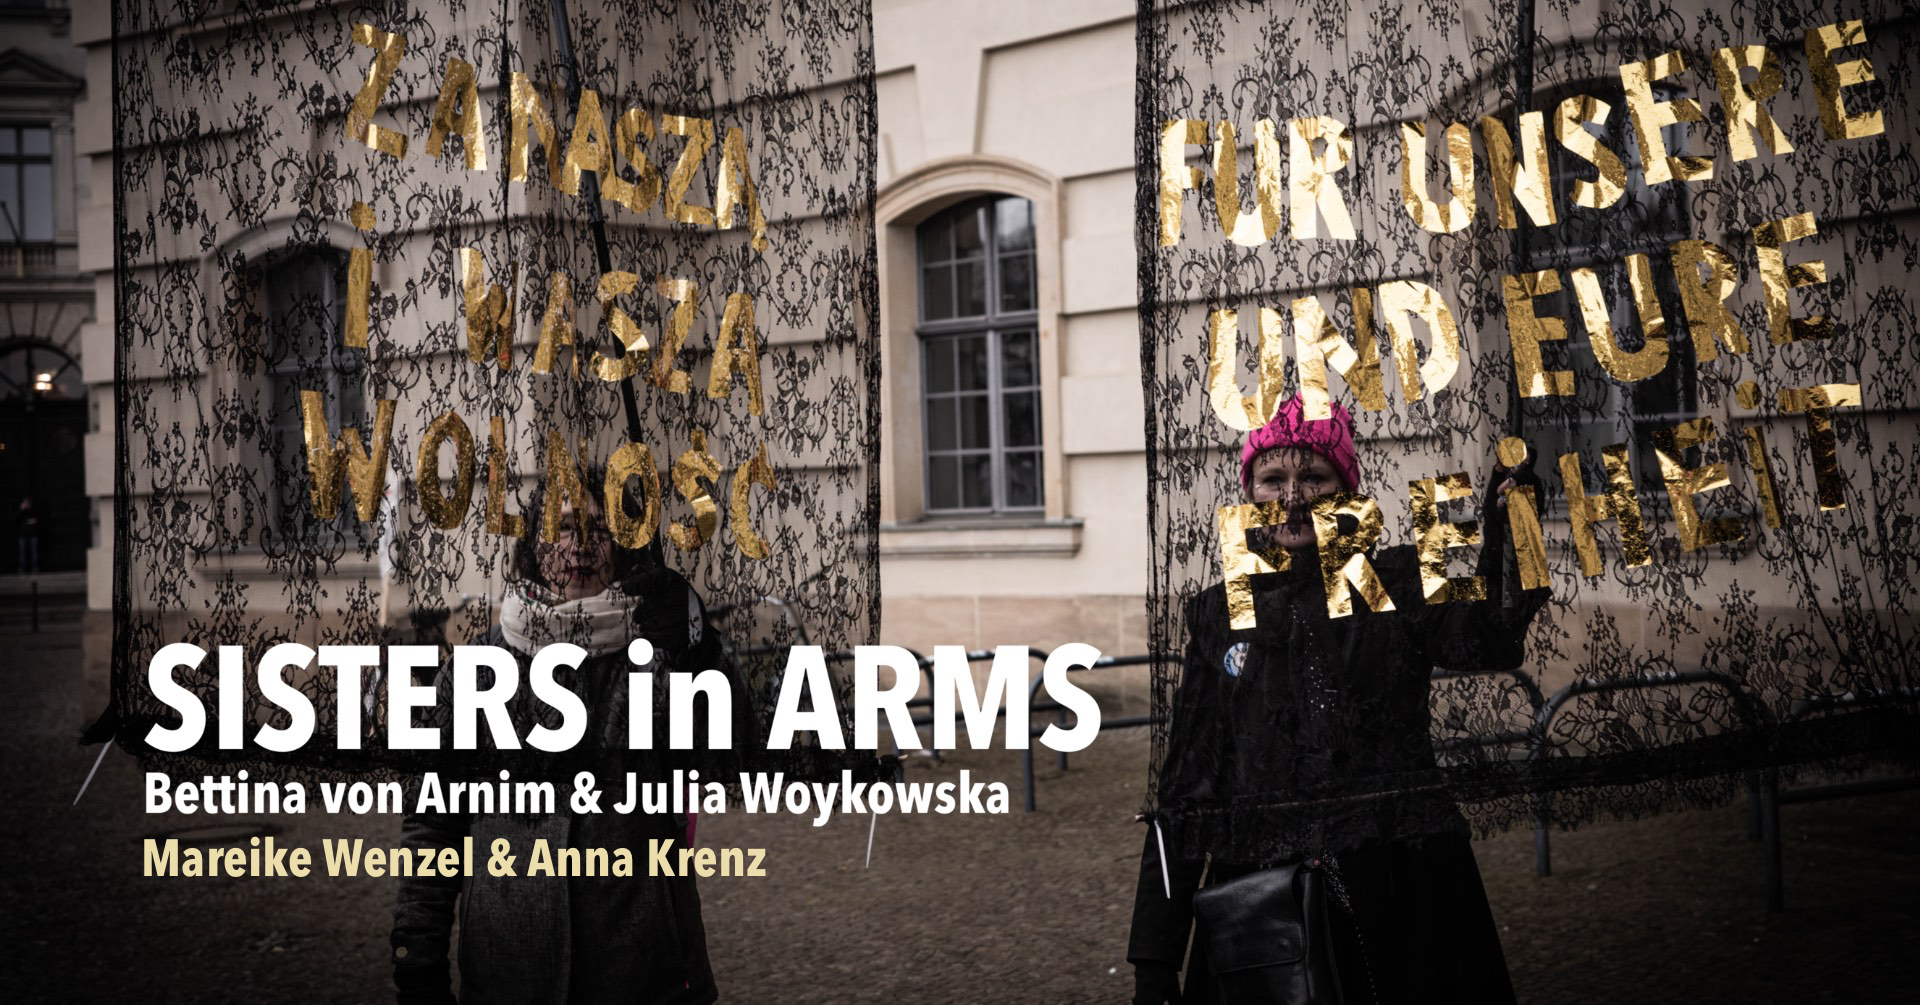 8.7.2023 Sisters in Arms / Ausstellung und Performance